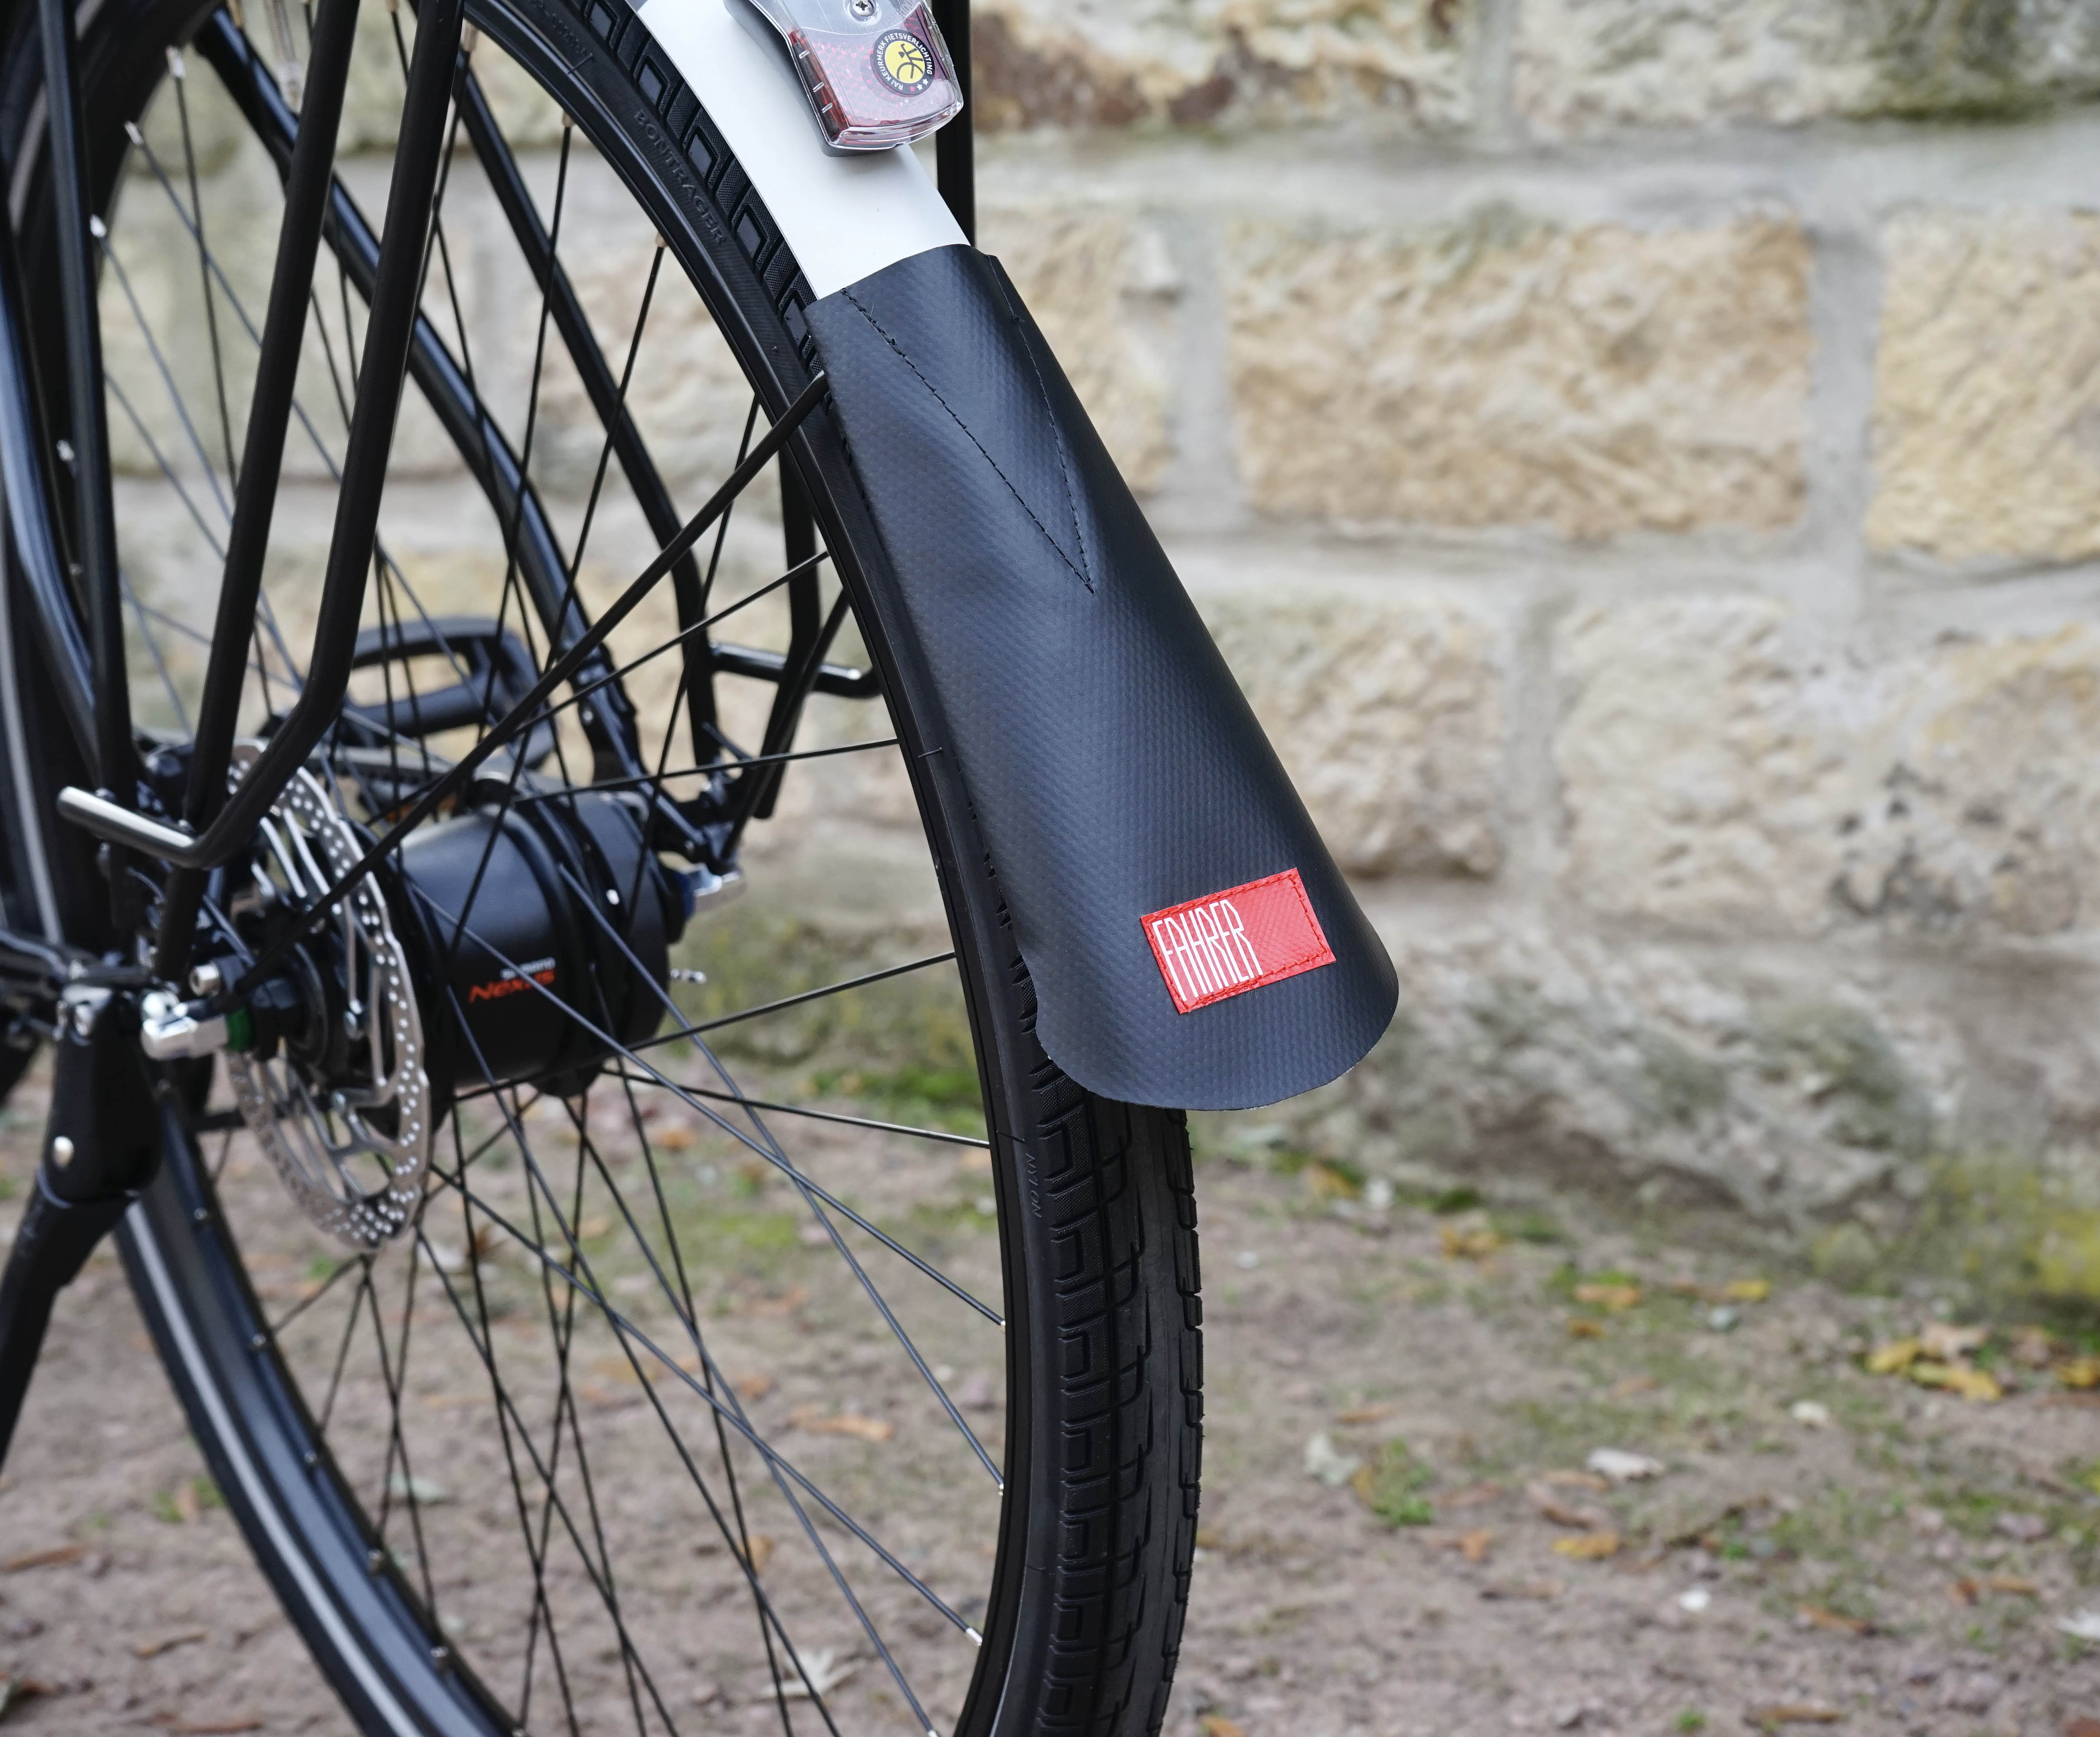 Fahrer LATZ - Mud flaps for mudguards, front and rear